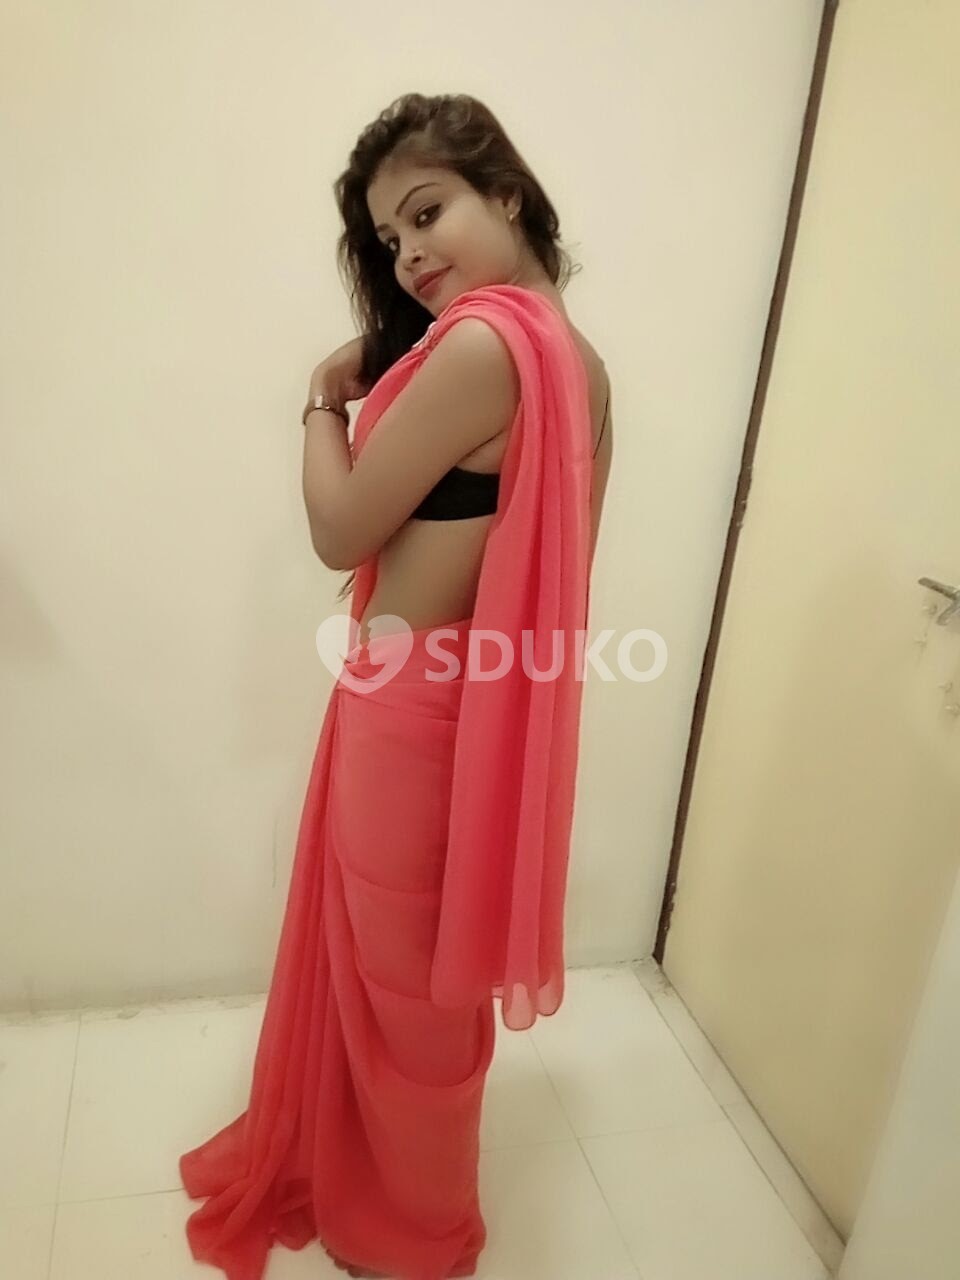 WHITEFIELD BEST DIRECT LOW PRICE BEST VIP GENUINE COLLEGE GIRL HOUSEWIFE AUNTIES SERVICE AVAILABLE 100% SATISFACTION ANY